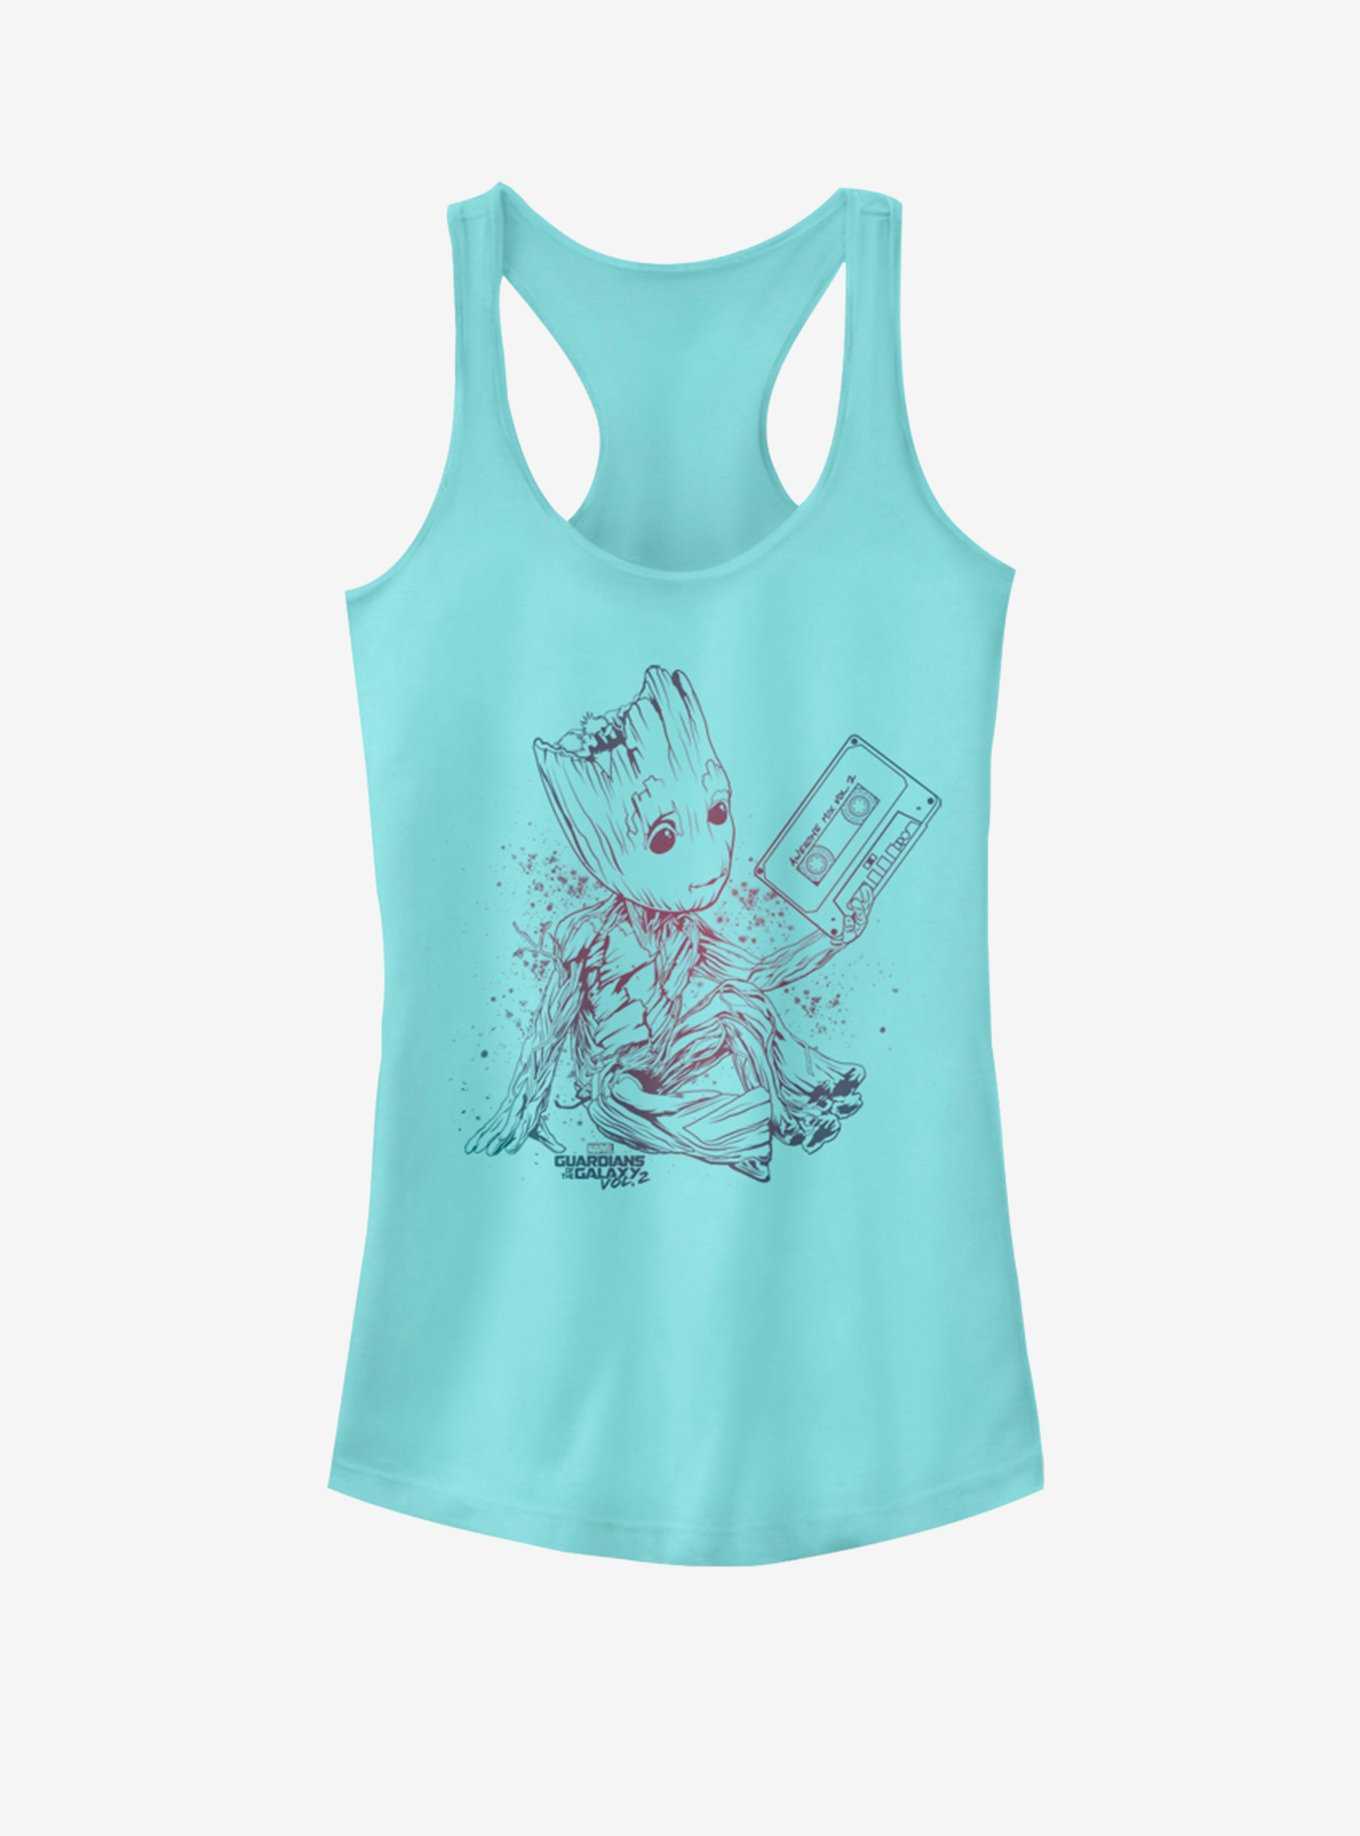 Marvel Guardians of the Galaxy Grootient Girls Tank, , hi-res